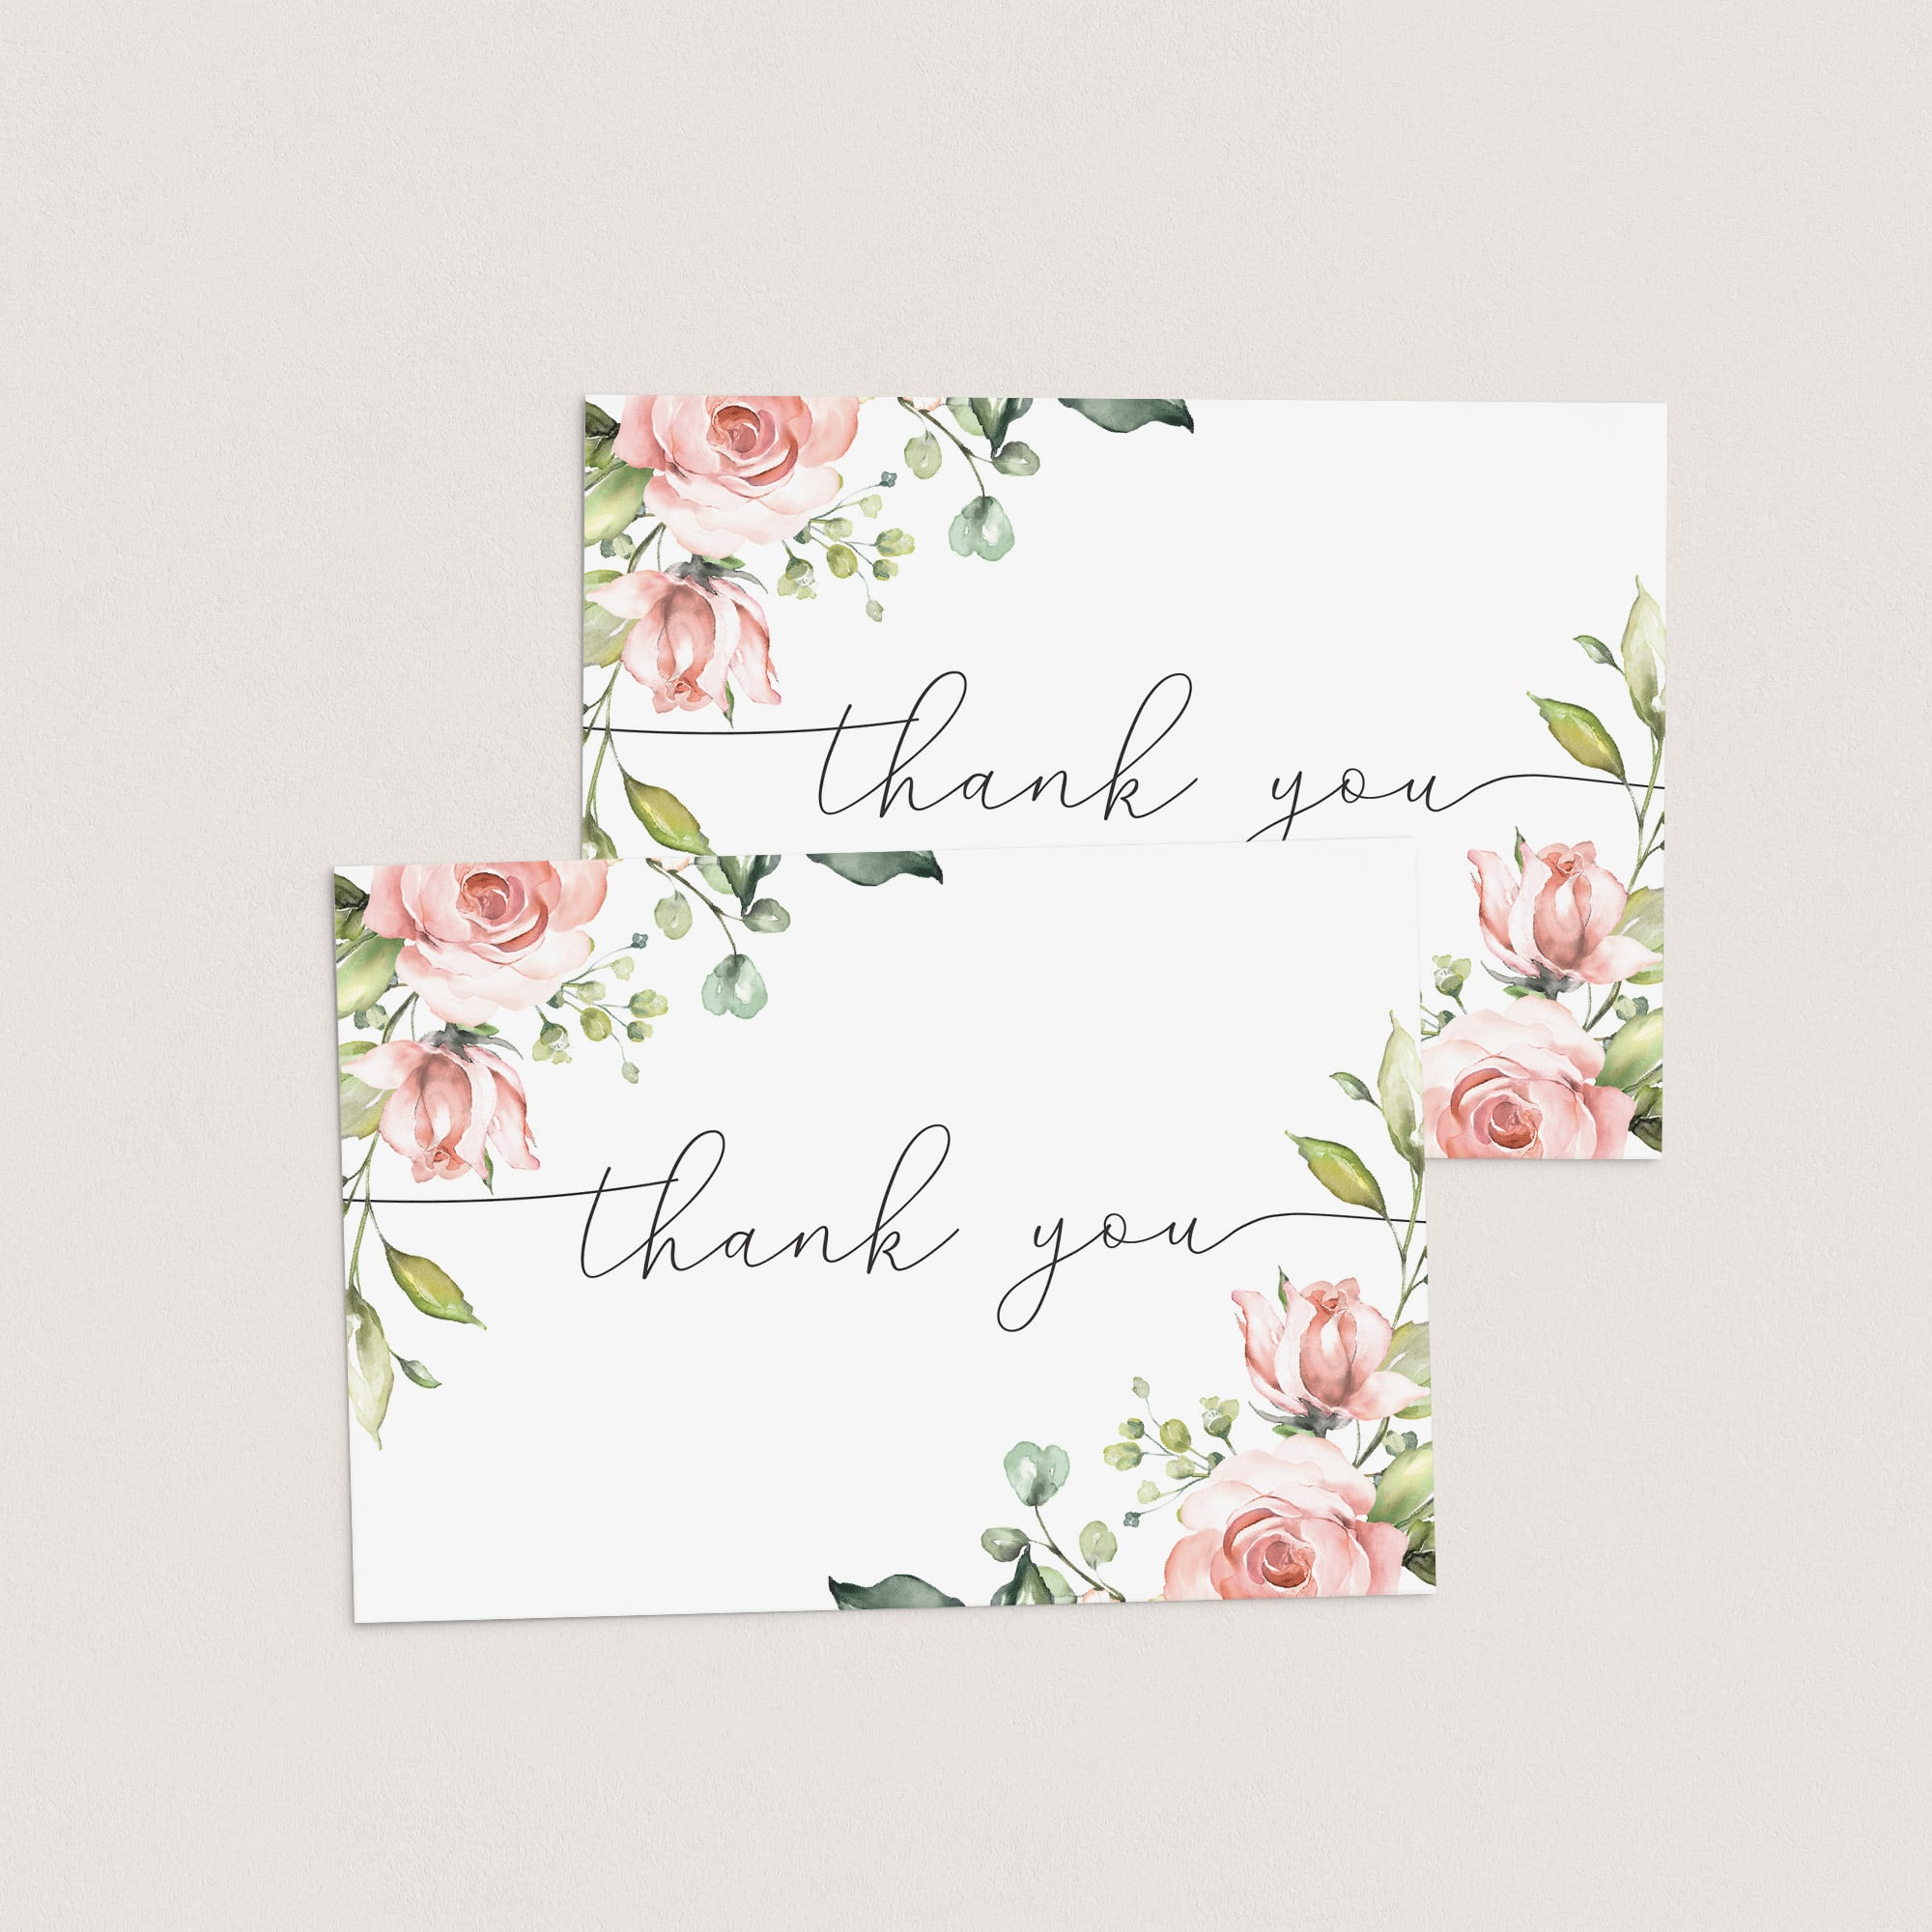 Floral watercolor thank you cards instant download by LittleSizzle